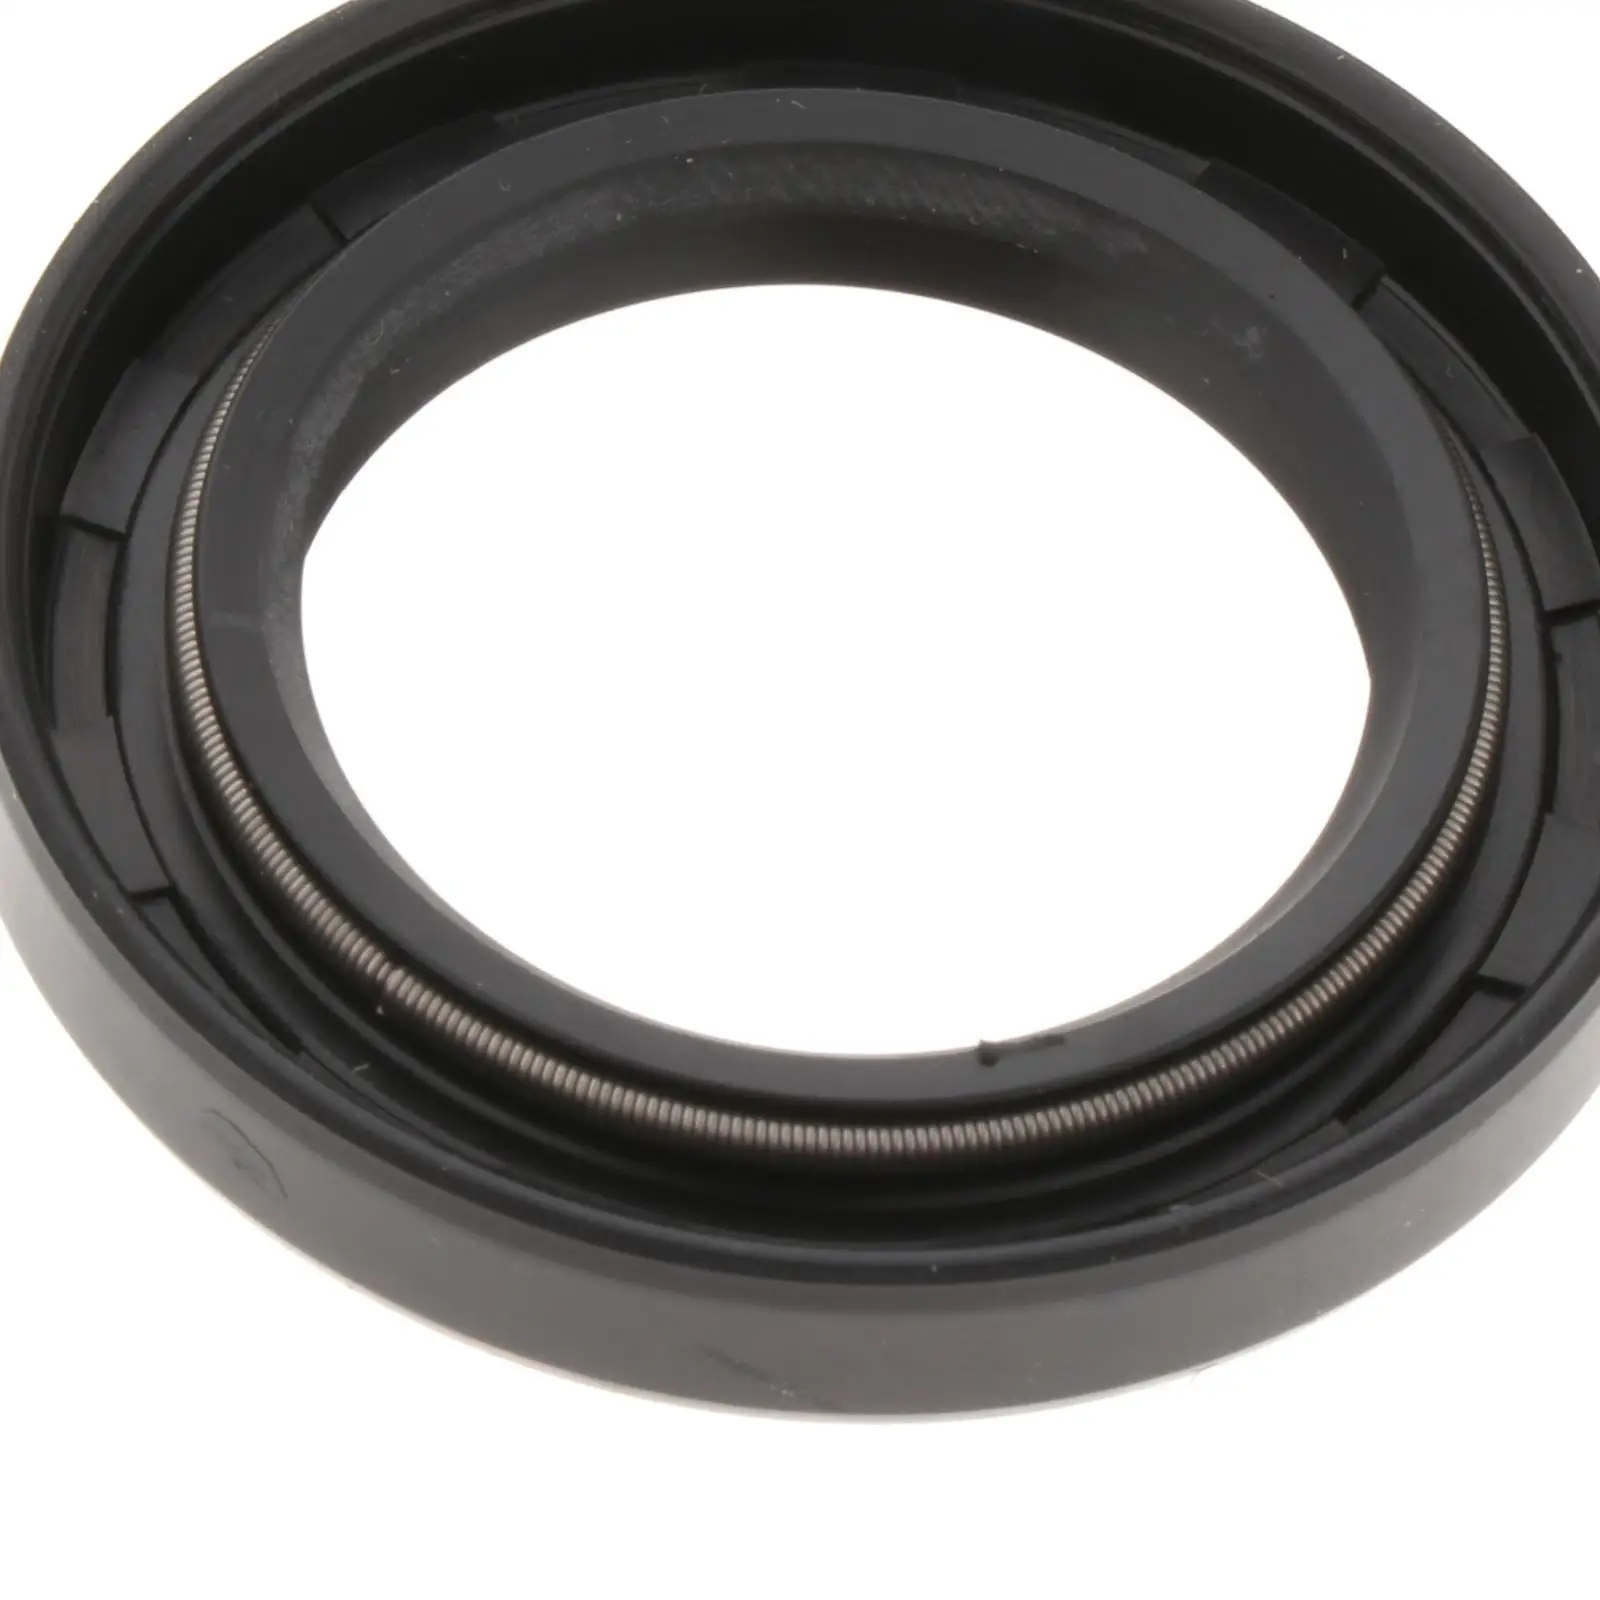 Oil Seal for  Outboard Motor 2T 60HP-90HP Accessory Replaces